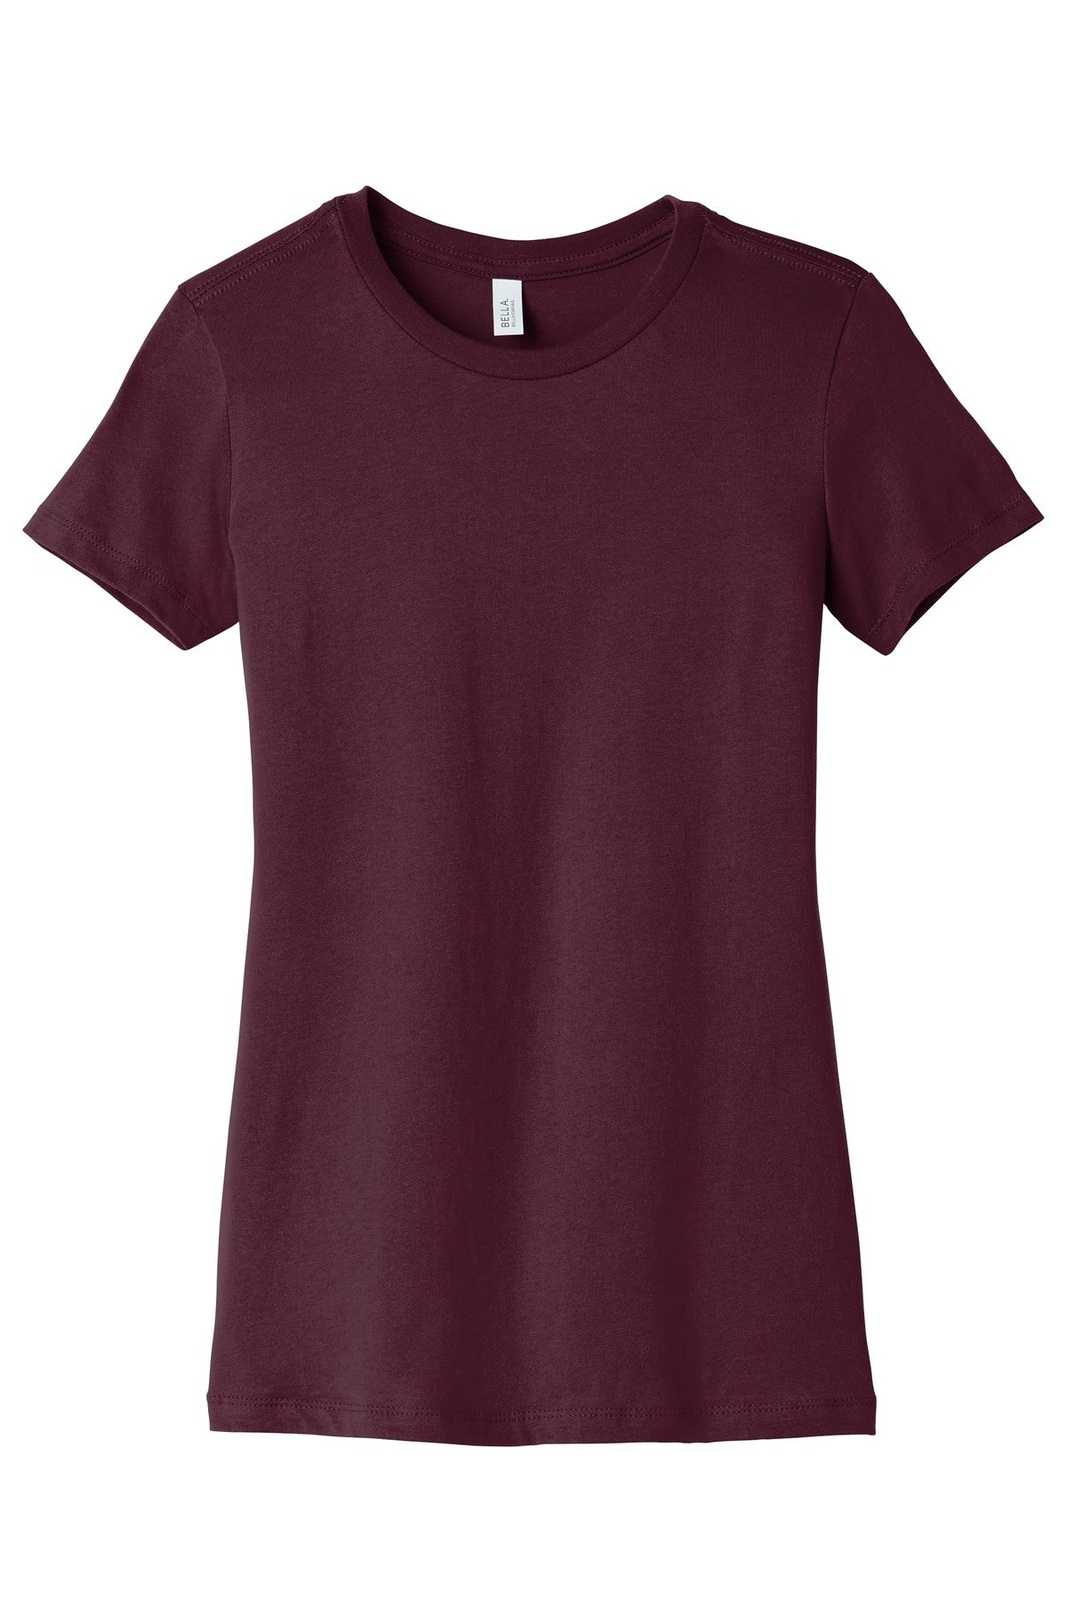 Bella + Canvas 6004 Women's The Favorite Tee - Maroon - HIT a Double